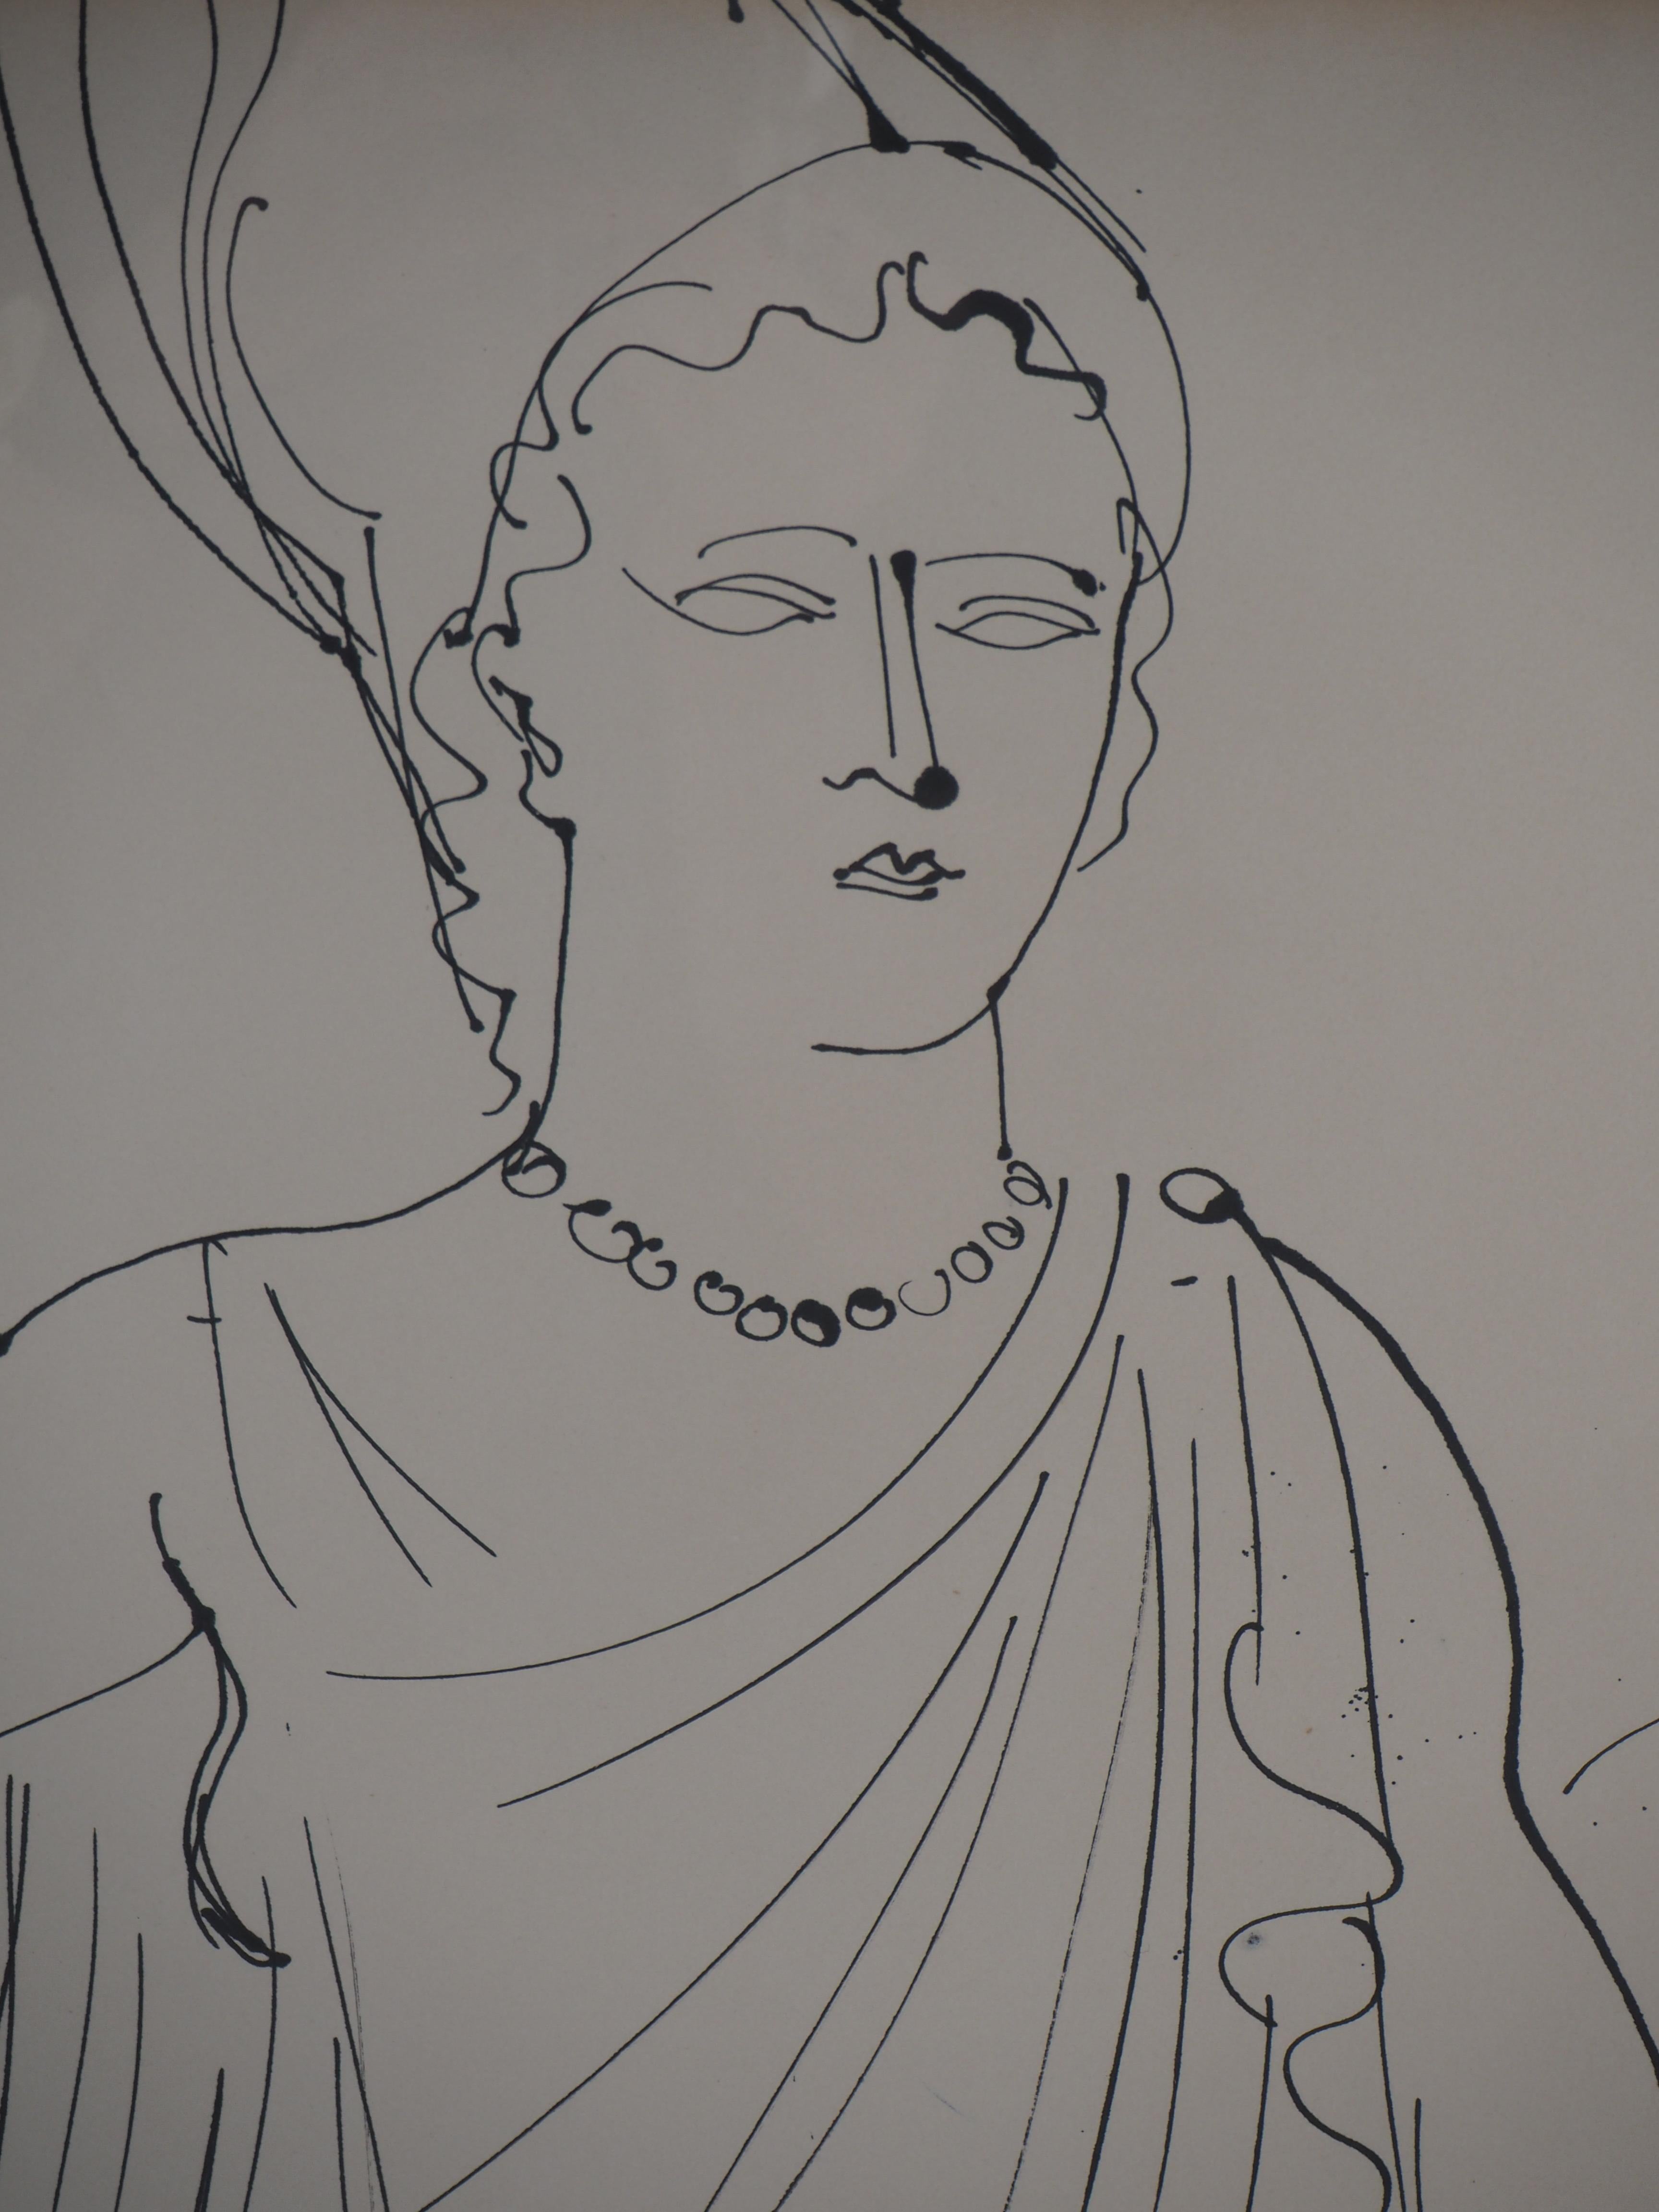 Raoul DUFY
Athena, the Goddess of Wisdom and War 

Original Ink Drawing
Handsigned bottom right
Handsigned and titled on the back of the frame
On paper 65 x 50 cm at view (c. 26 x 20 in)
Presented in a wood frame 80 x 64 cm (c. 32 x 26